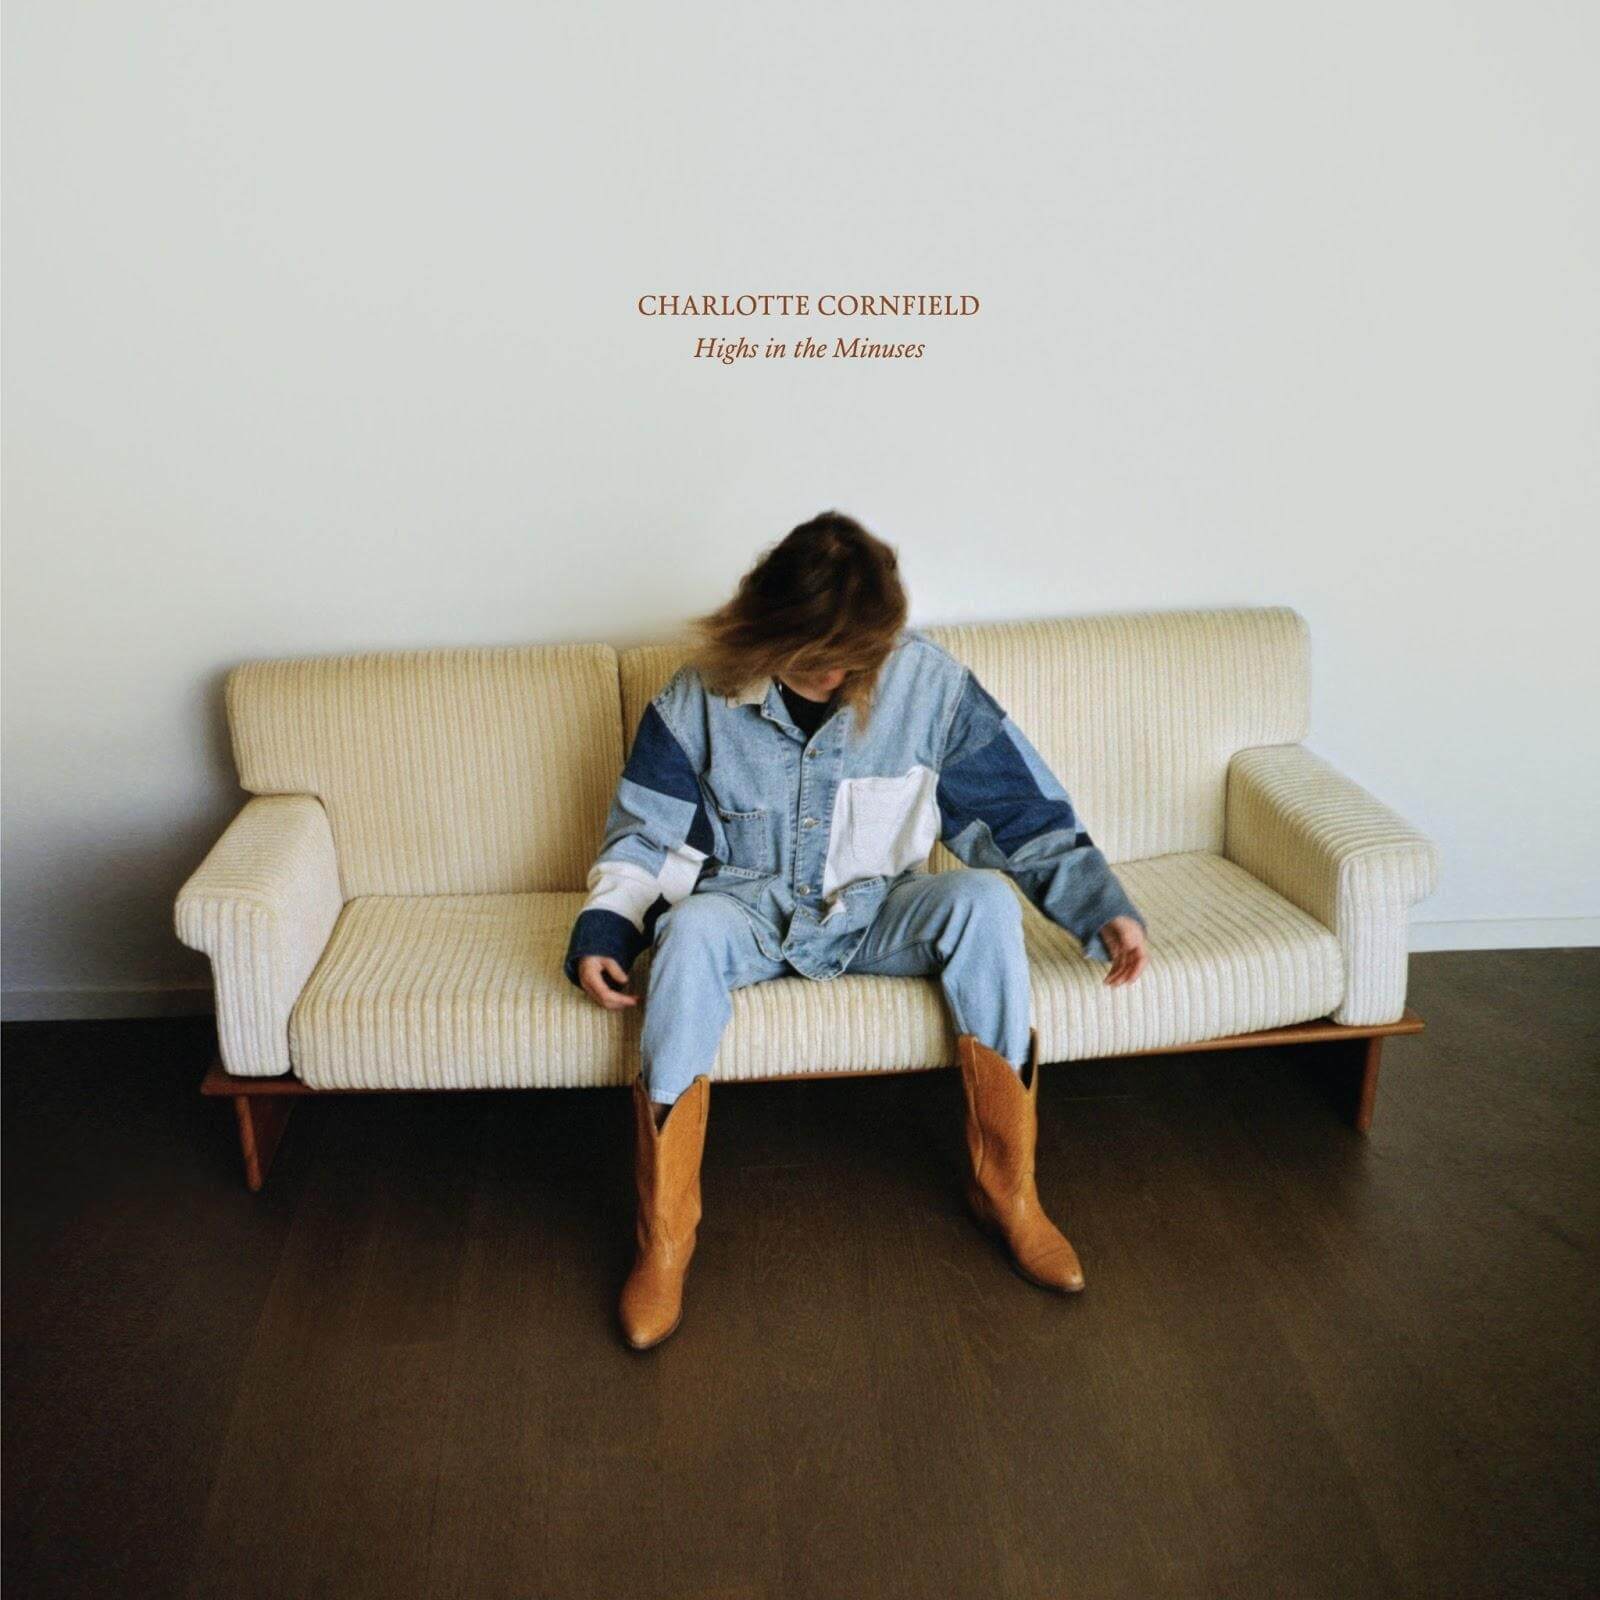 Highs in the Minuses by Charlotte Cornfield Album Review by Greg Rogers for Northern Transmissions